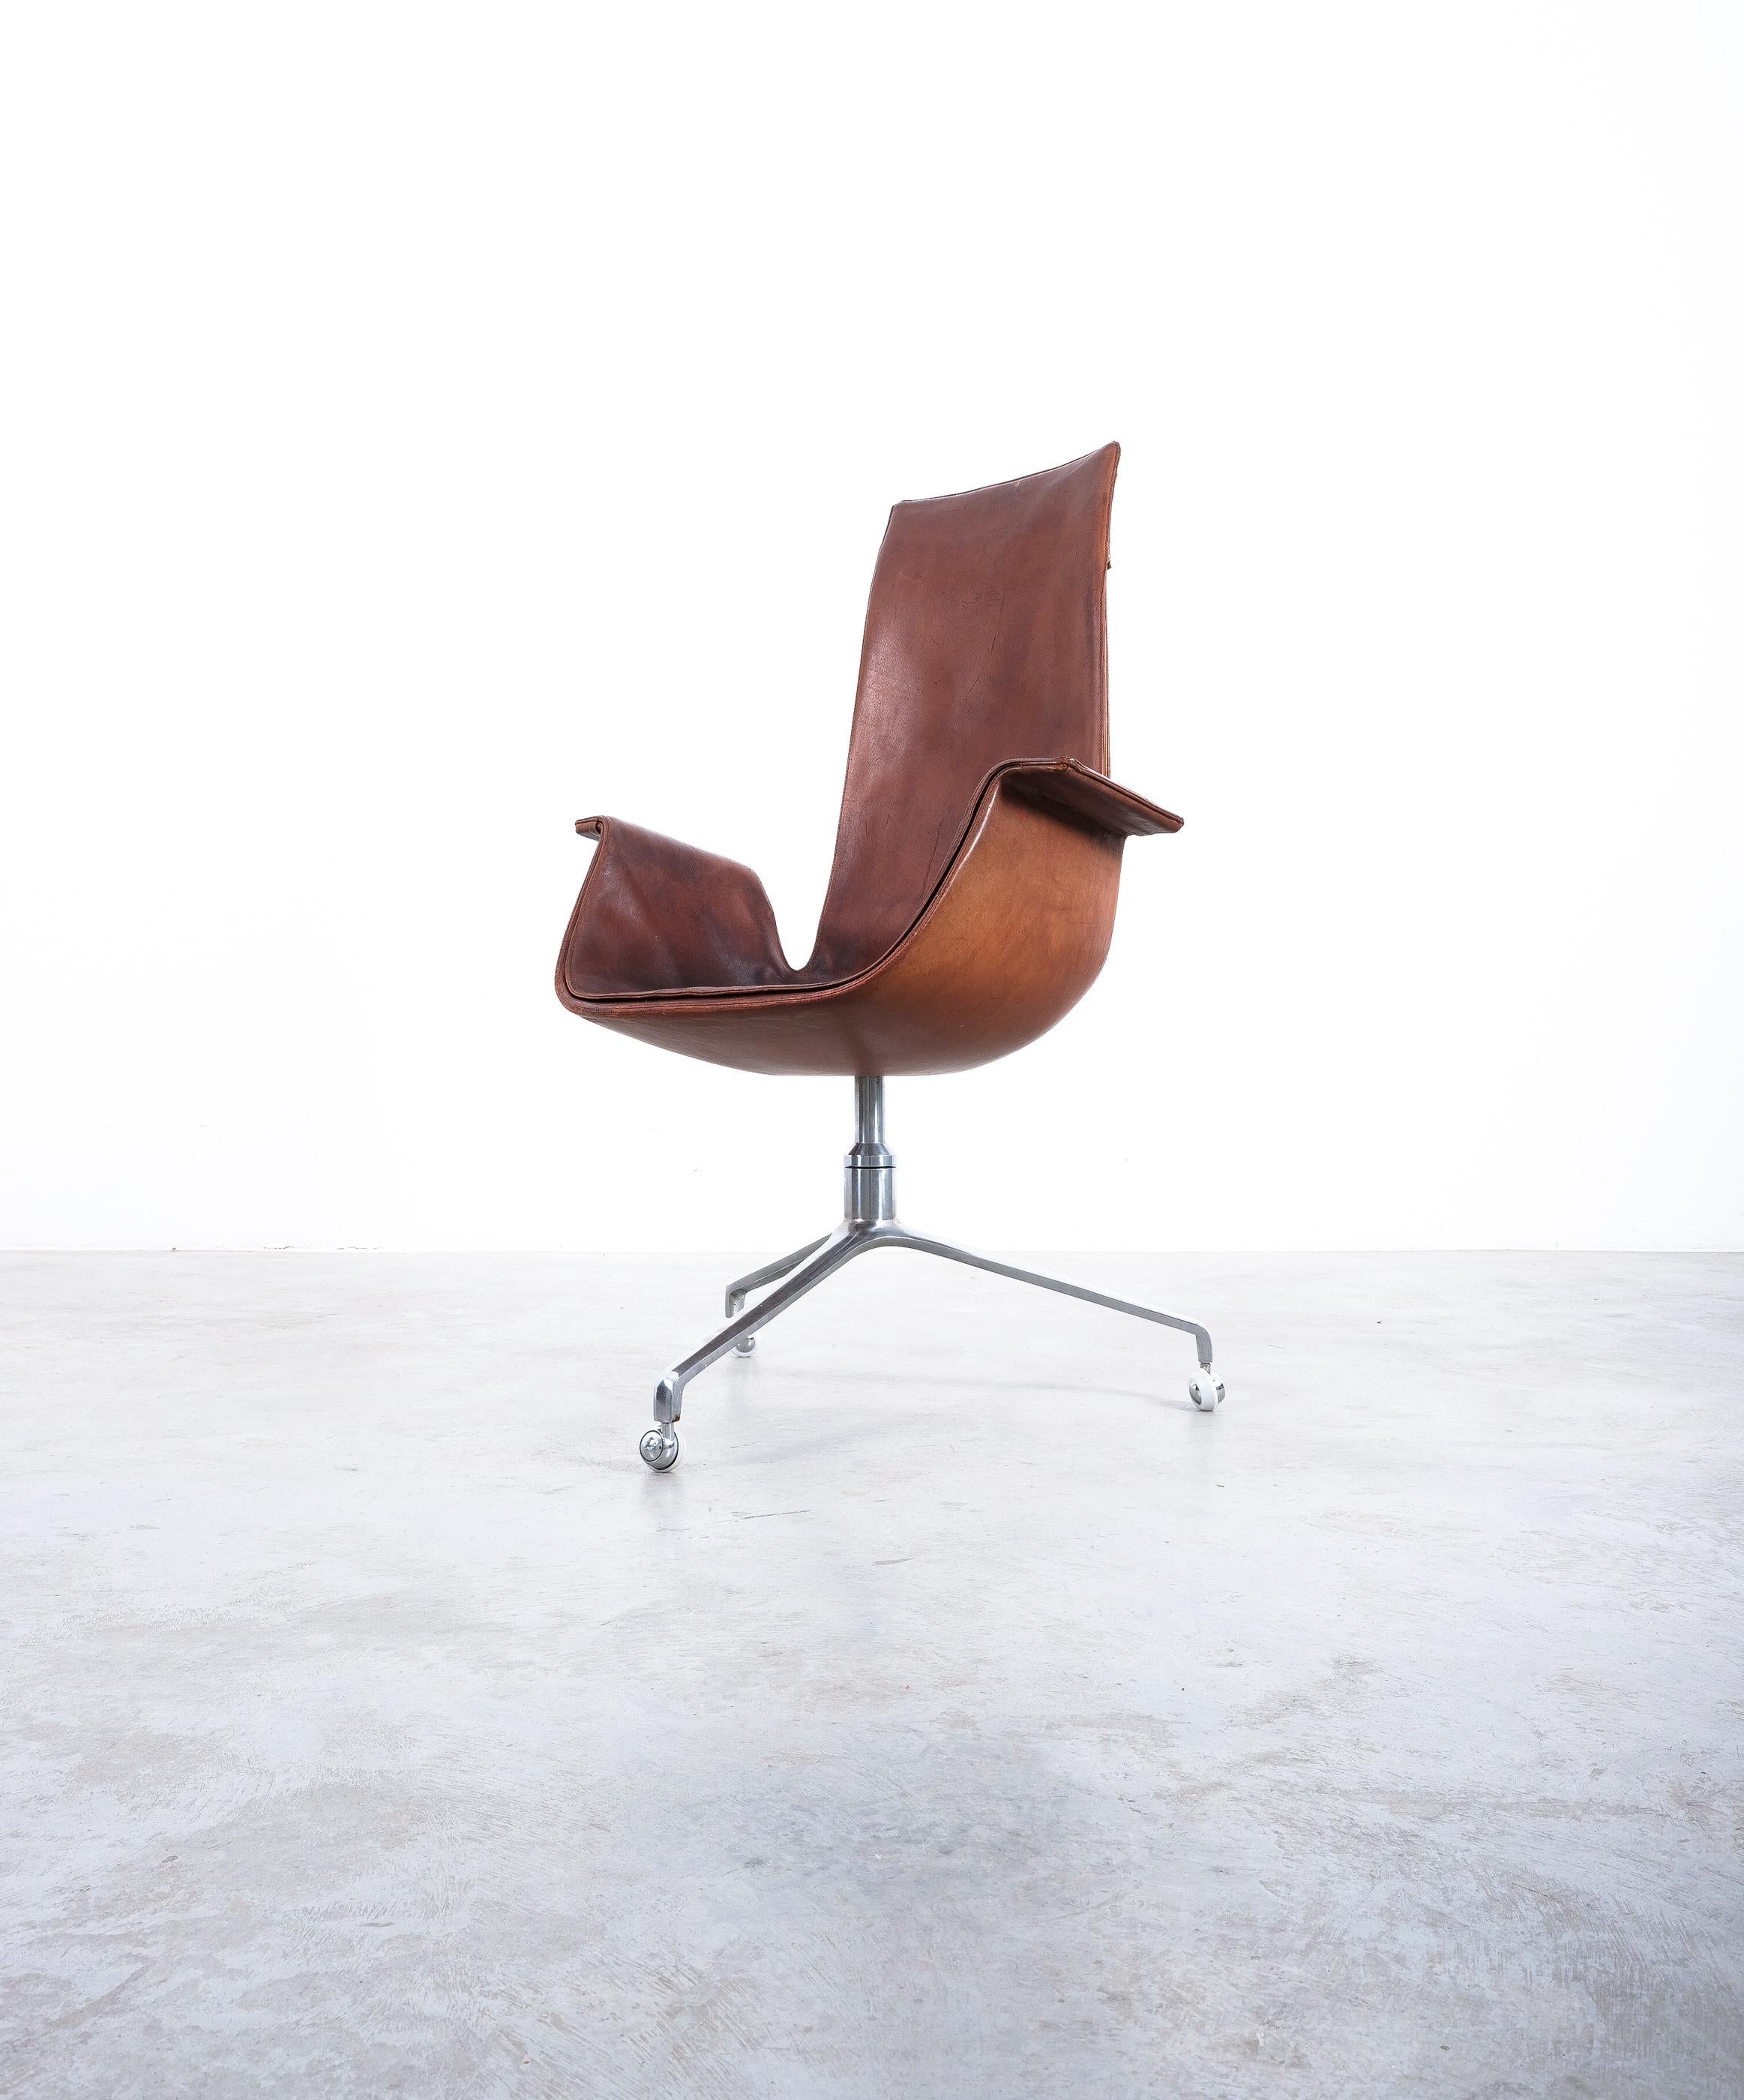 FK 6725 Fabricius and Kastholm Brown Leather High Back Bird Desk Chair, 1964 1